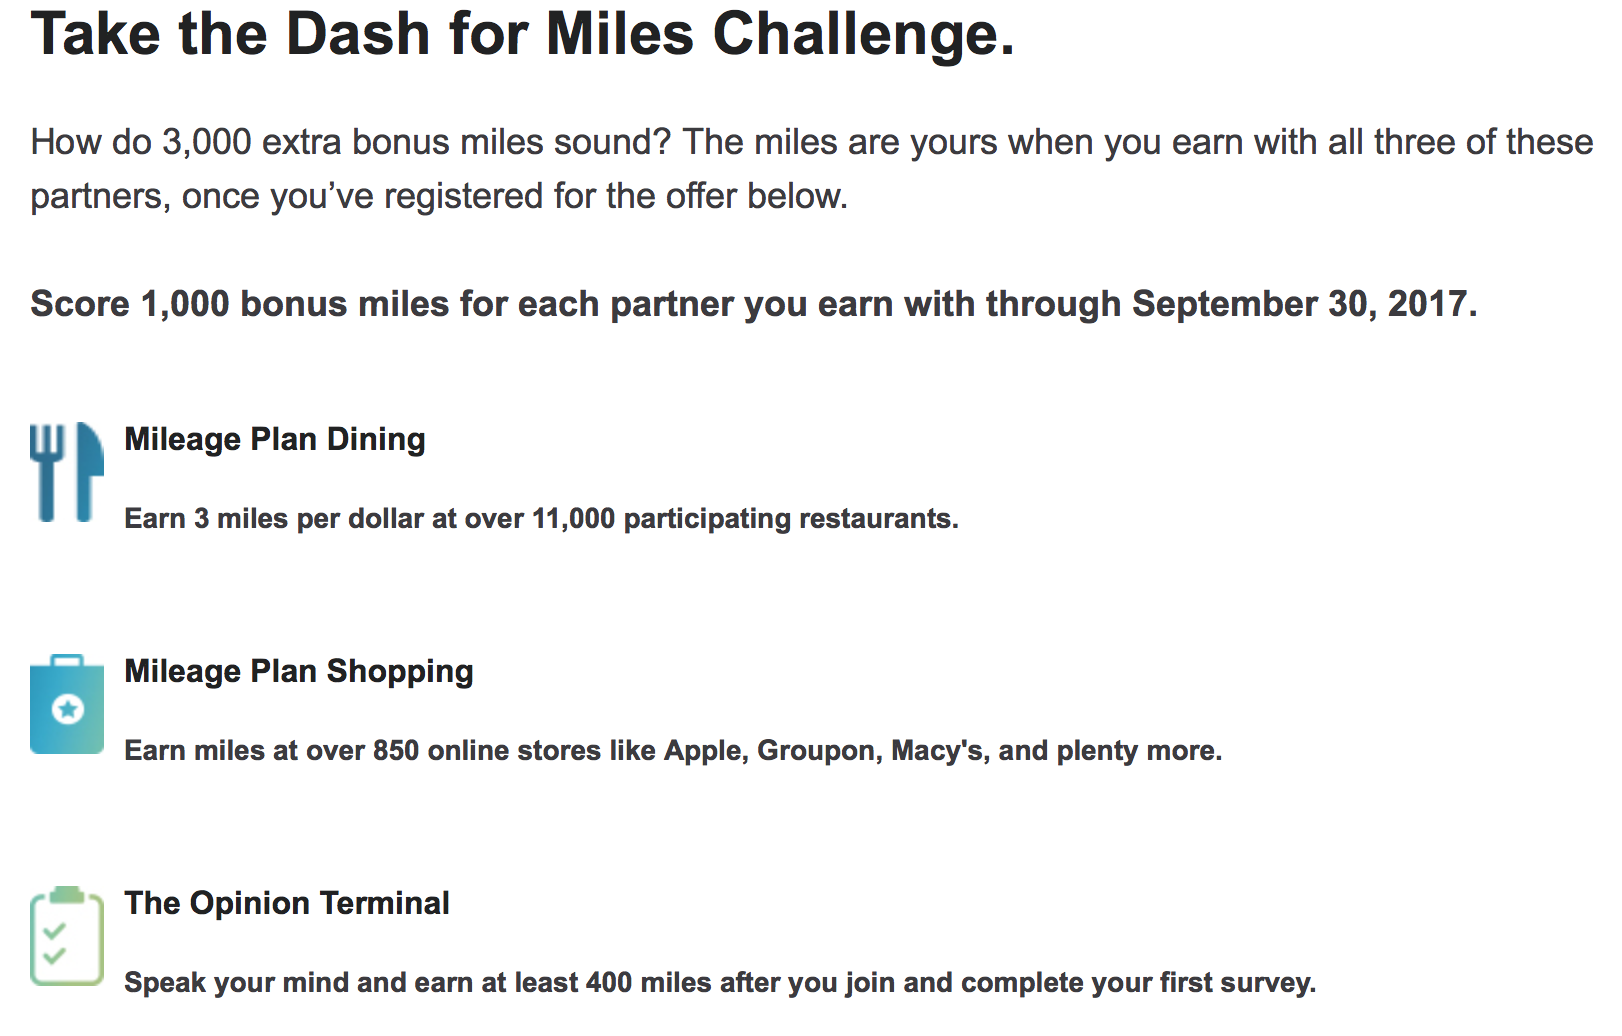 Take the Dash for Miles Challenge. How do 3,000 extra bonus miles sound? The miles are yours when you earn with all three of these partners, once you’ve registered for the offer below. Score 1,000 bonus miles for each partner you earn with through September 30, 2017. Mileage Plan Dining Mileage Plan Dining Earn 3 miles per dollar at over 11,000 participating restaurants. Mileage Plan Shopping Mileage Plan Shopping Earn miles at over 850 online stores like Apple, Groupon, Macy's, and plenty more. Mileage Plan Survey The Opinion Terminal Speak your mind and earn at least 400 miles after you join and complete your first survey.